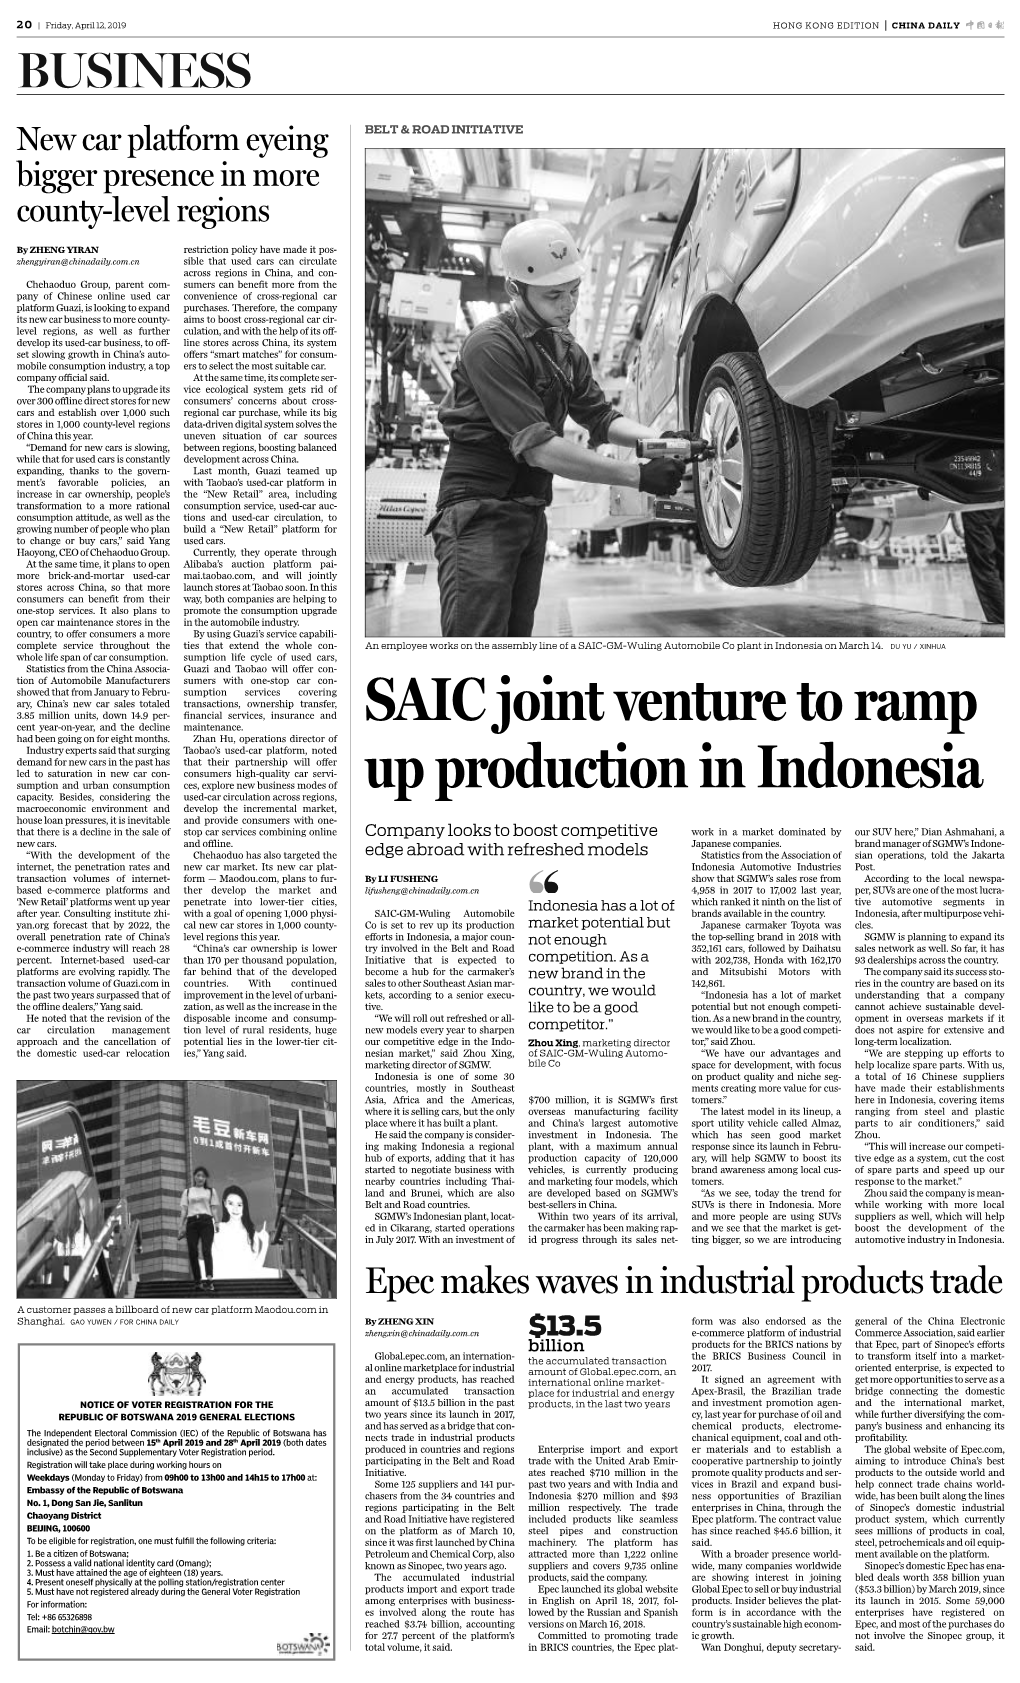 SAIC Joint Venture to Ramp up Production in Indonesia